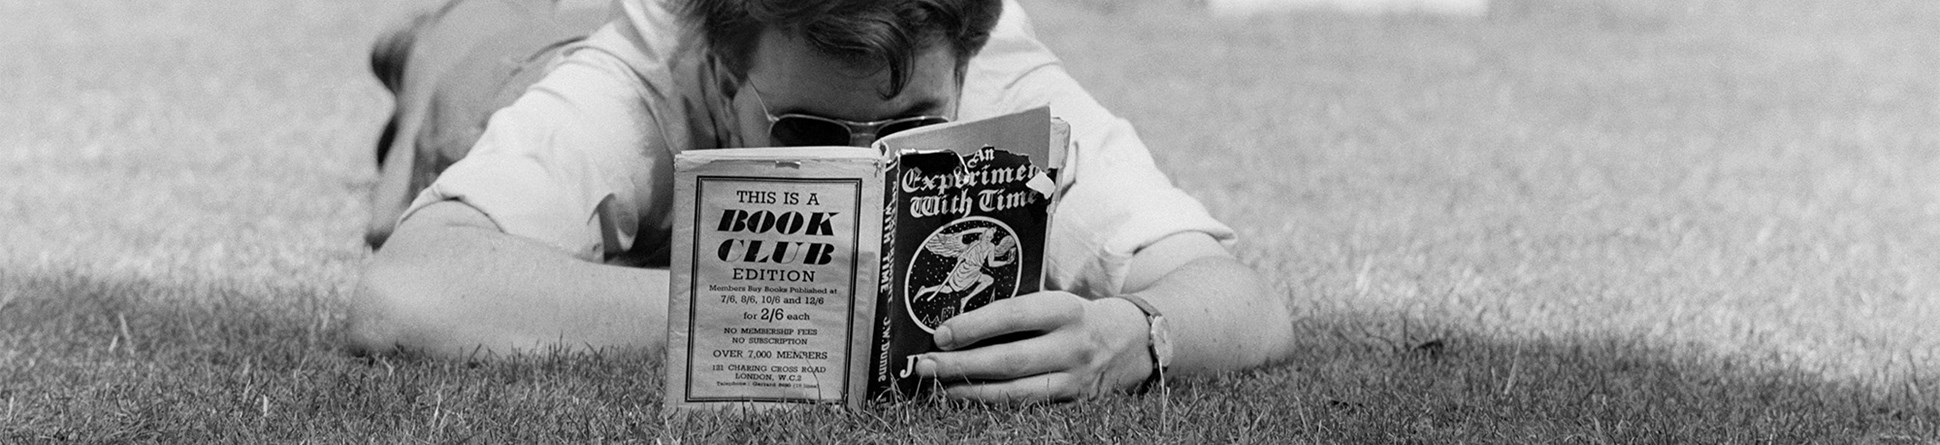 Black and white image of a man viewed head-on lying flat on the grass, engrossed in a book.